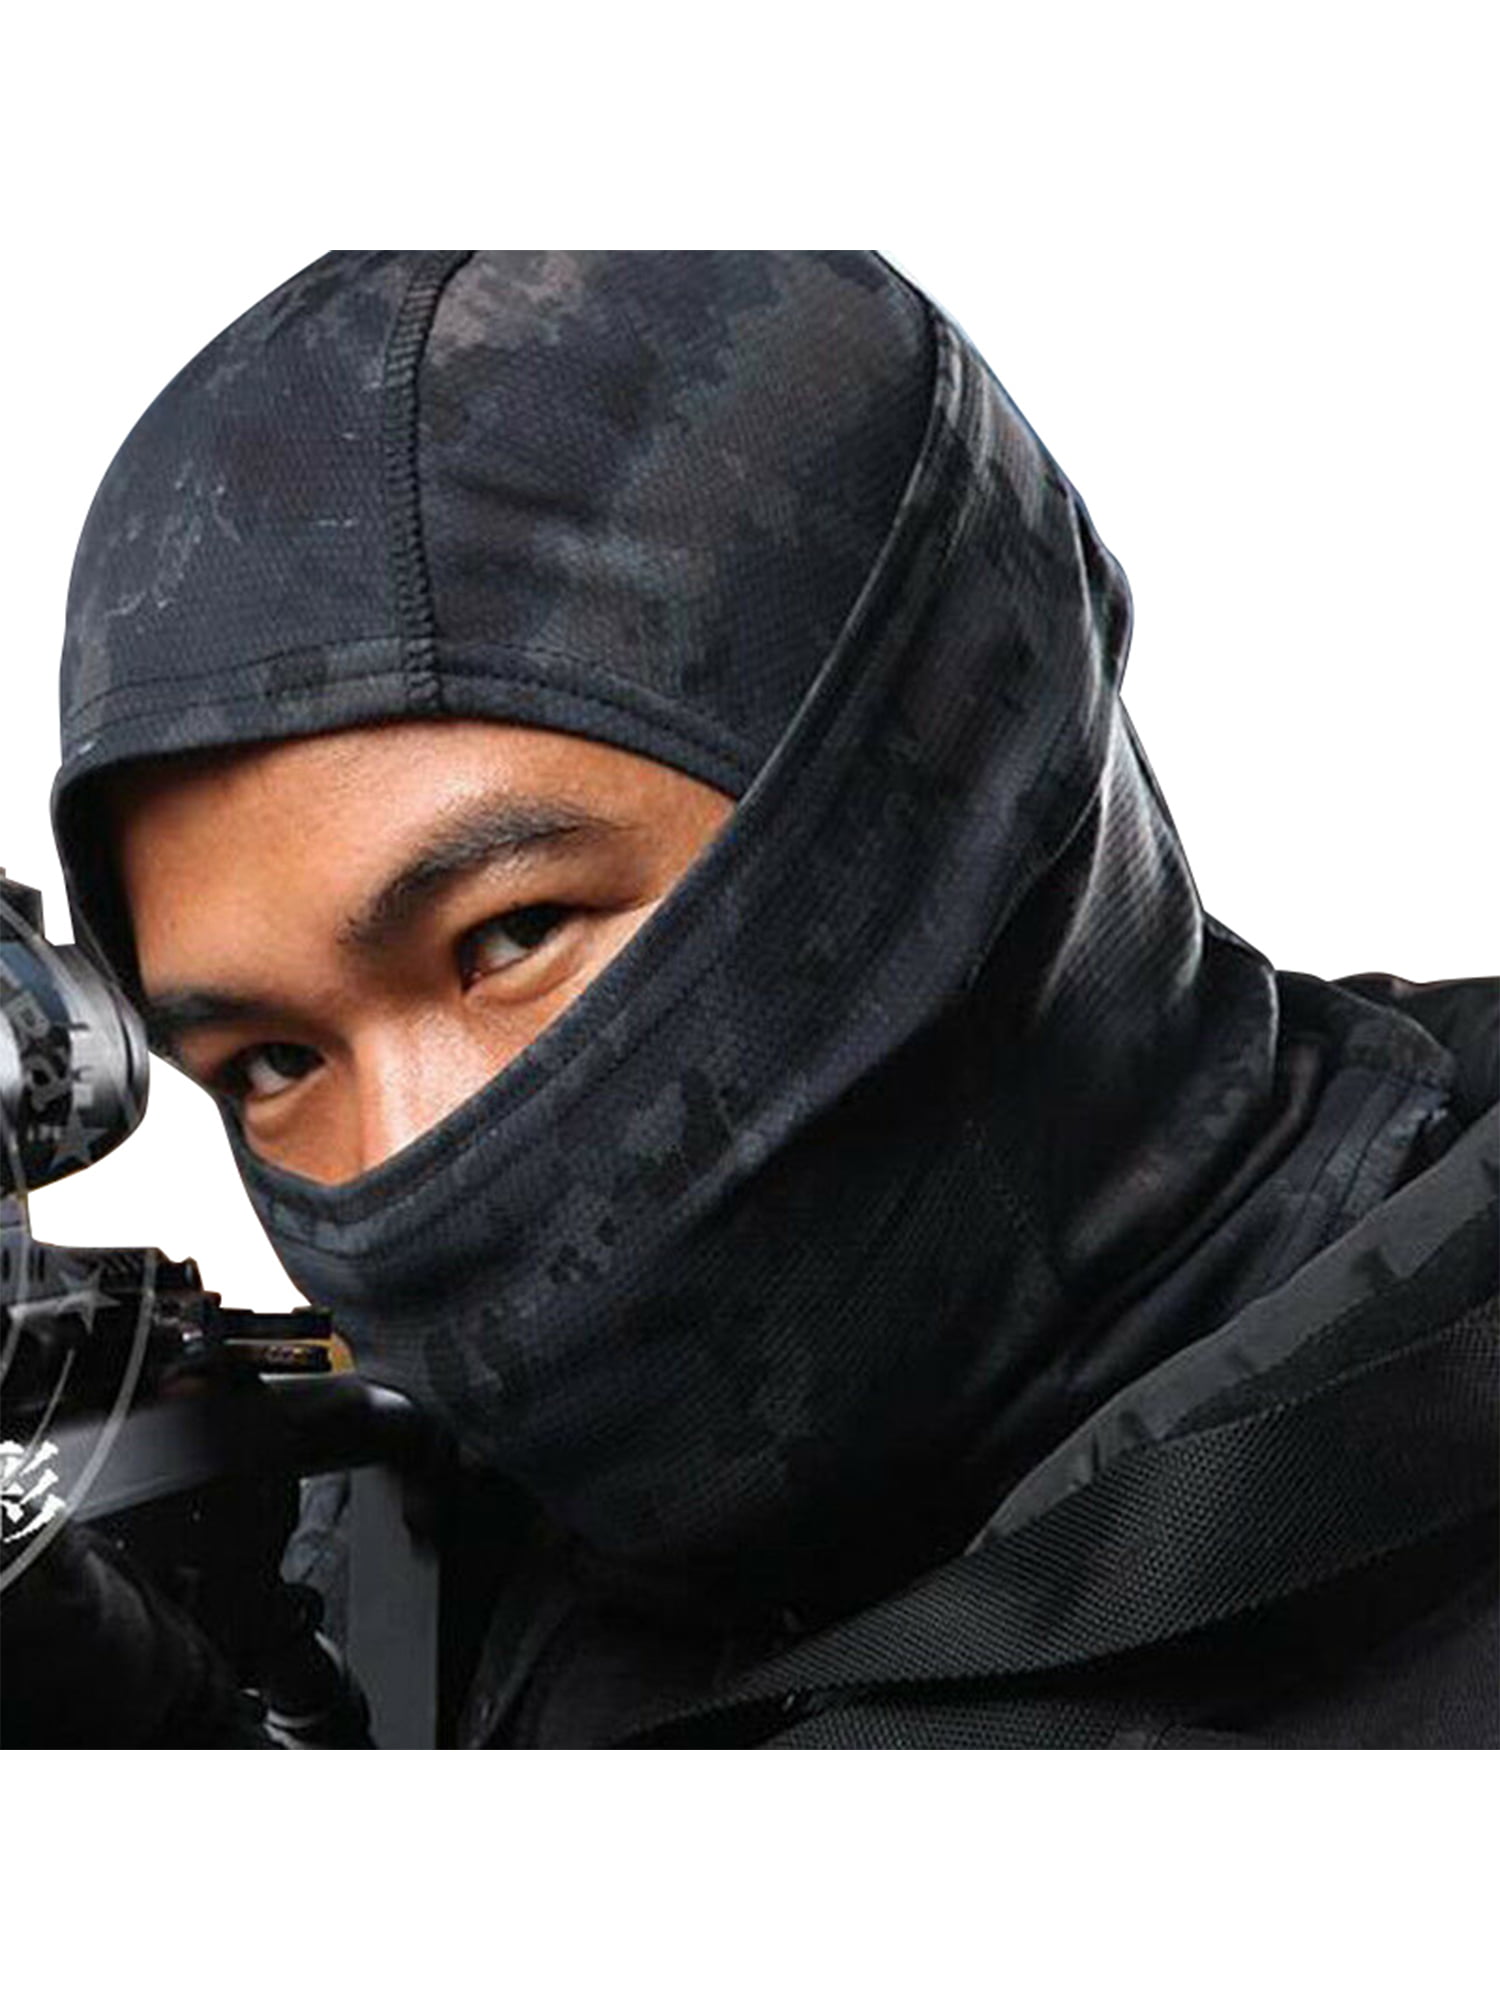 Details about   Outdoor Anti-UV Mask Motorcycle Face Masks Tactical Balaclava Hood for Men Women 